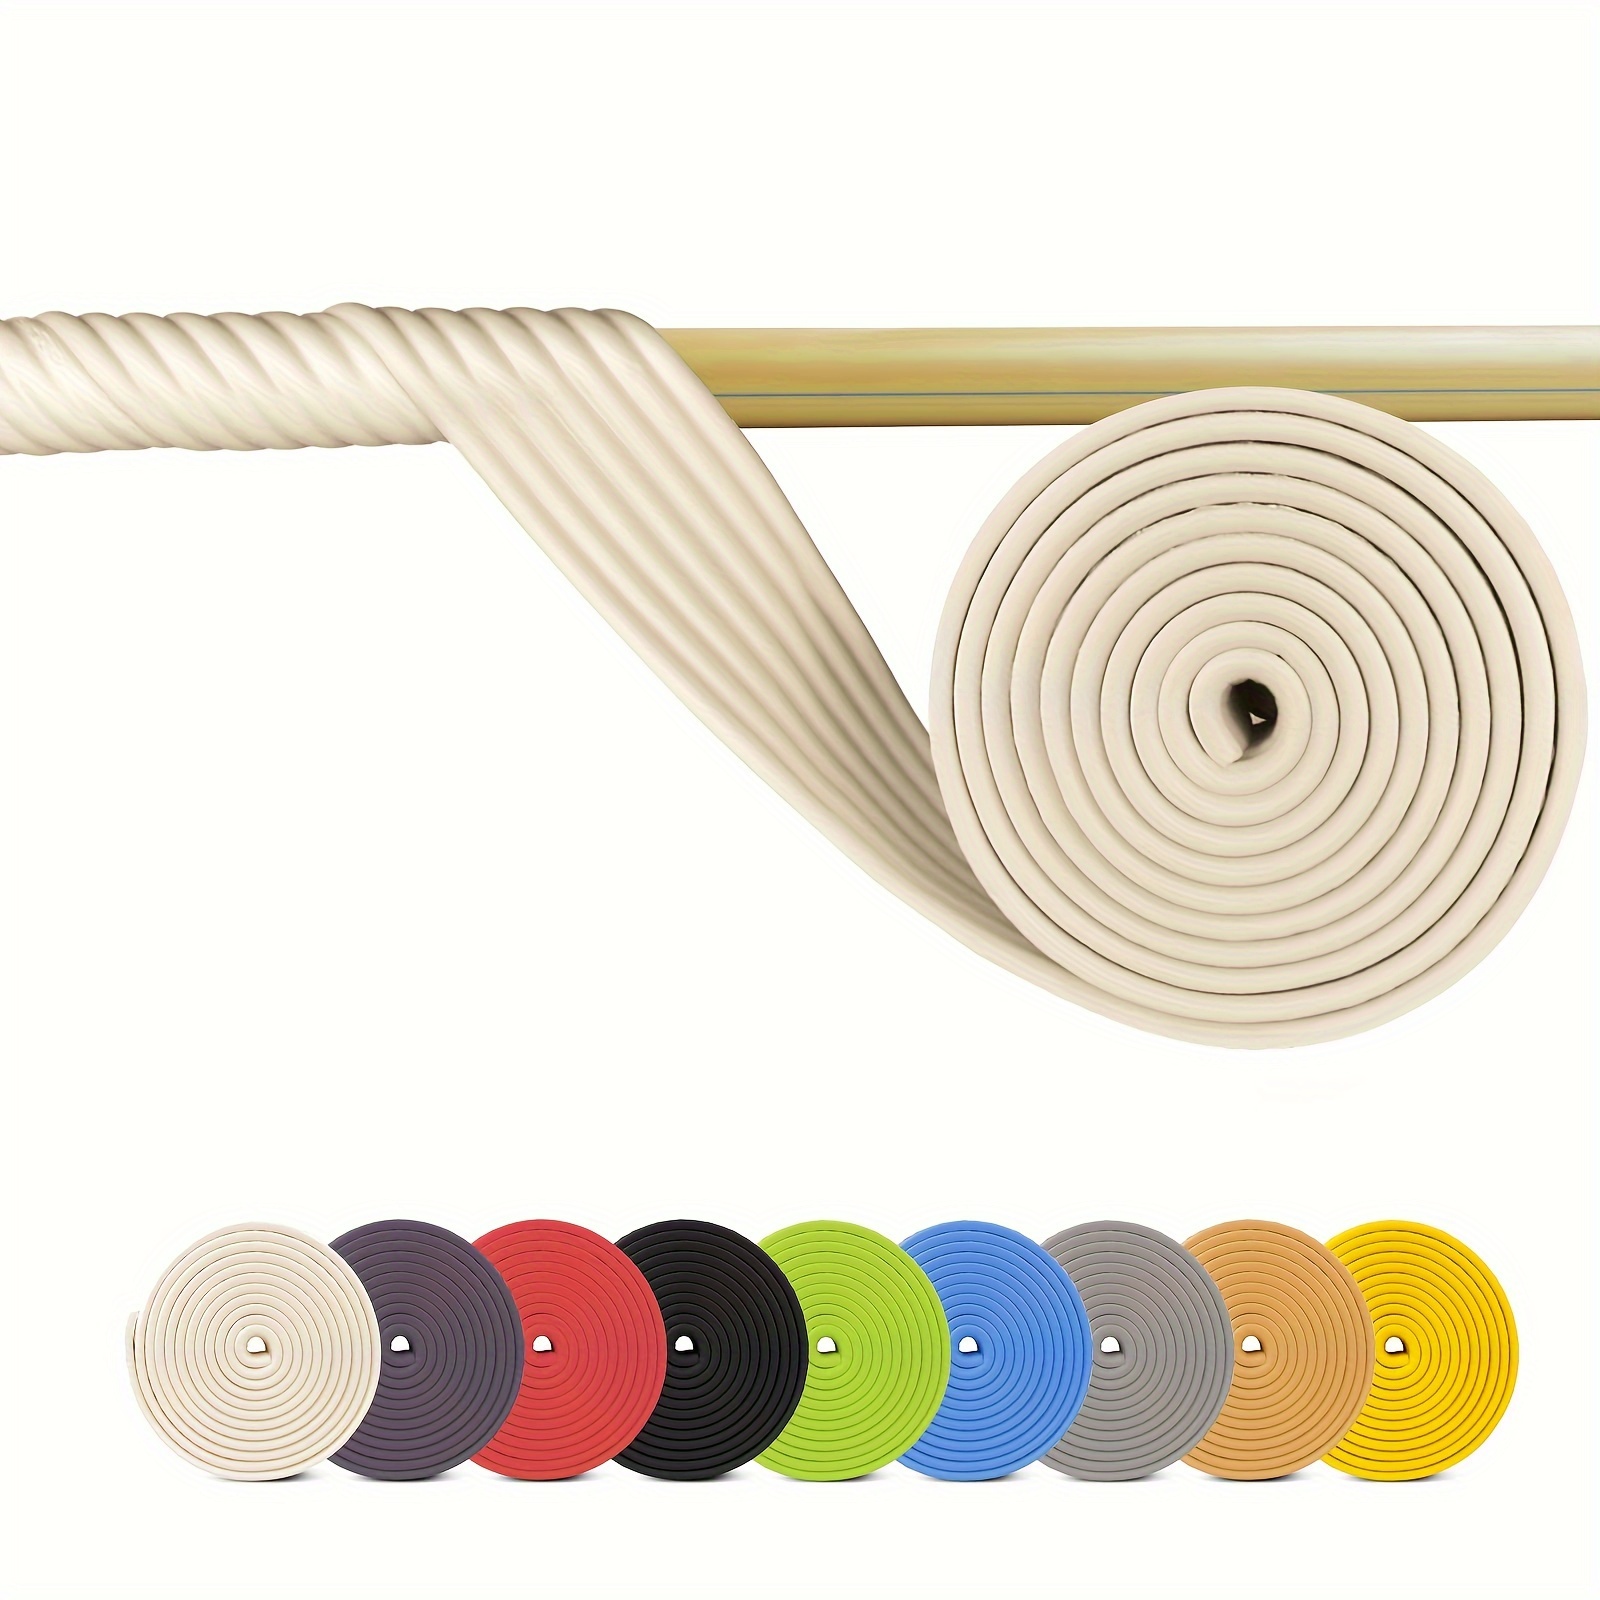 Colored Pipe Insulation Tape by Pipe Warmers